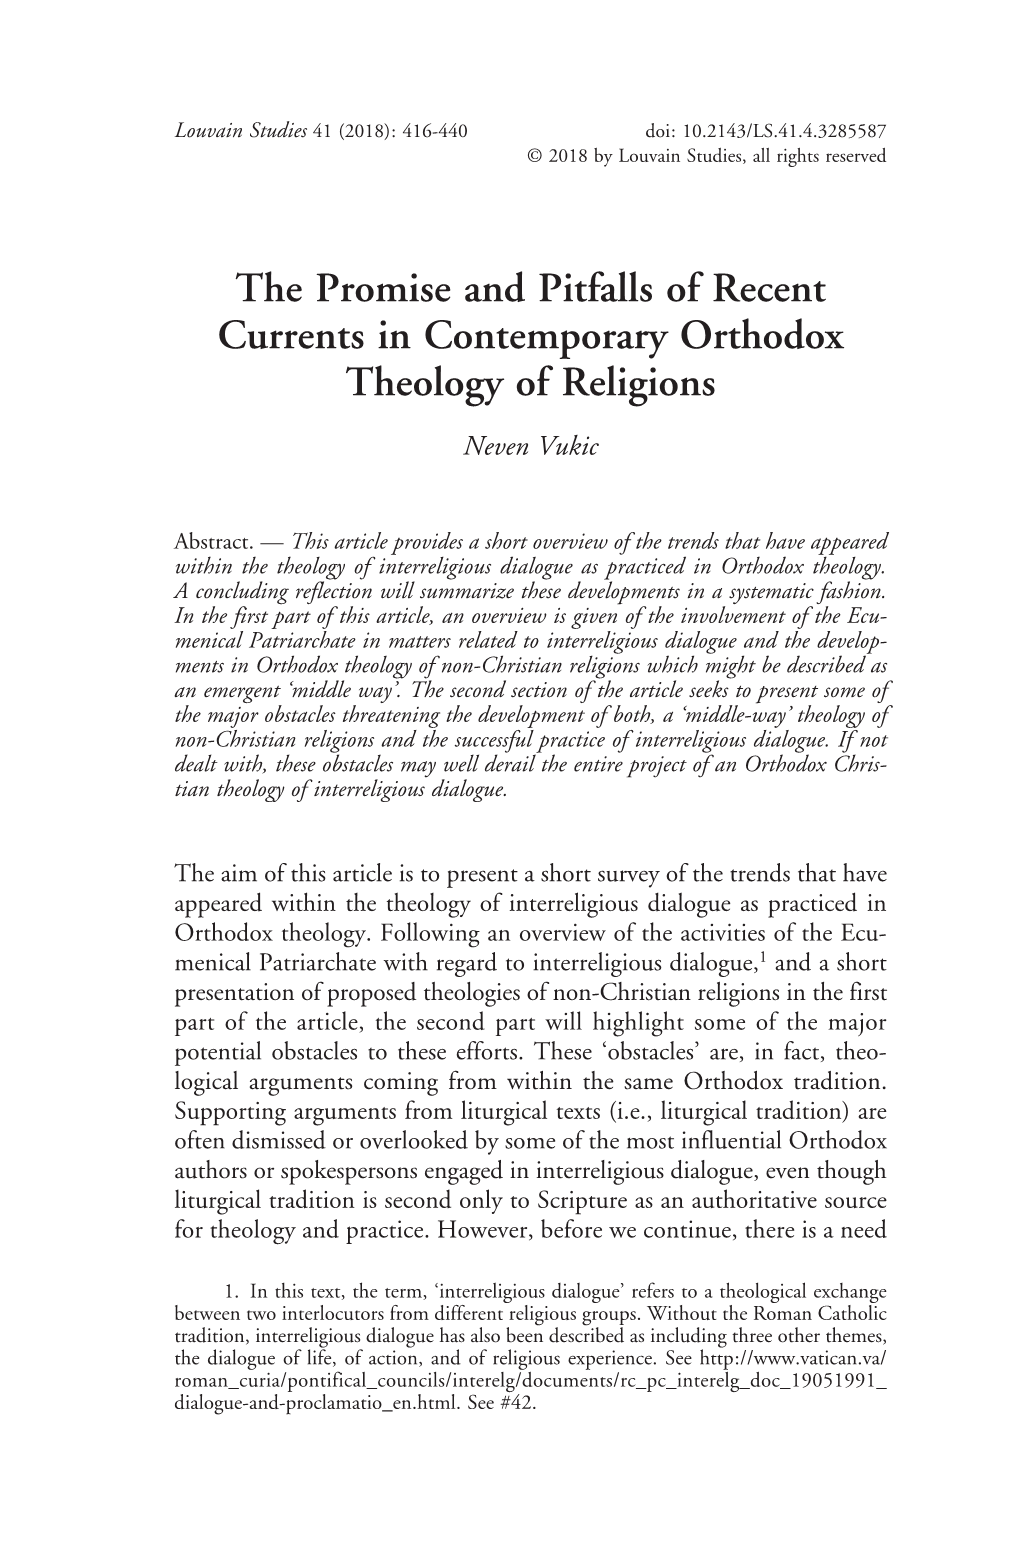 The Promise and Pitfalls of Recent Currents in Contemporary Orthodox Theology of Religions Neven Vukic